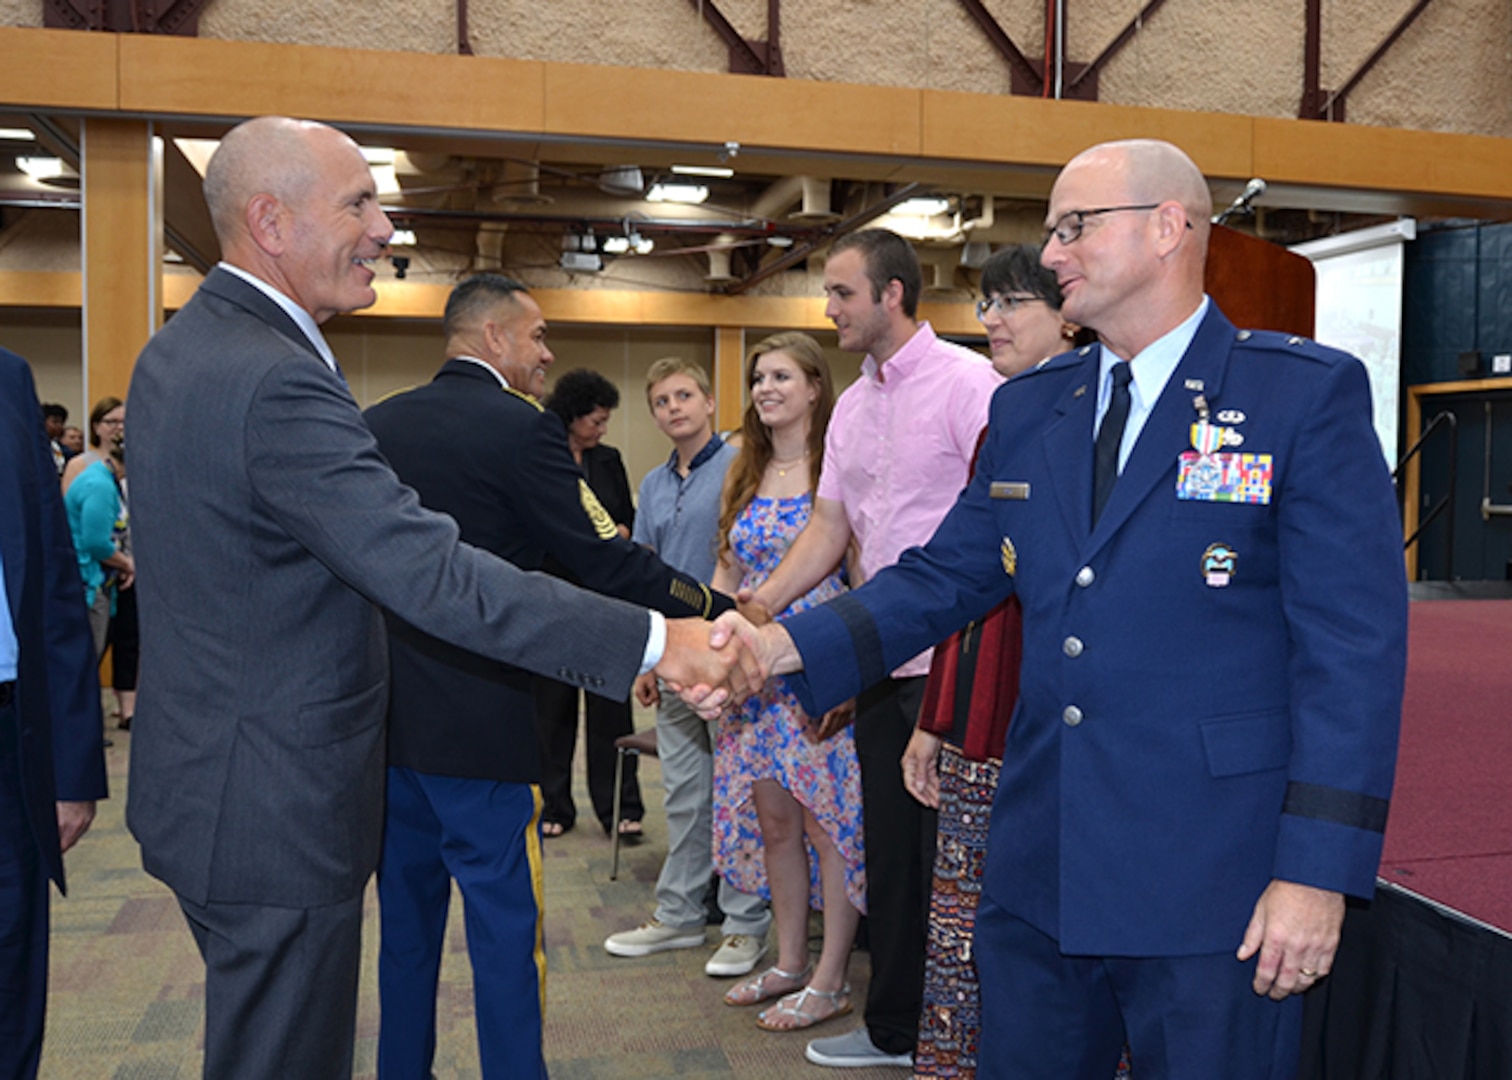 Outgoing Commander Air Force Brig. Gen. Allan Day shakes hands with Defense Logistics Agency Aviation Deputy Commander Charles Lilli in a receiving line after the DLA Aviation change of command ceremony June 28, 2017 on Defense Supply Center Richmond, Virginia. 